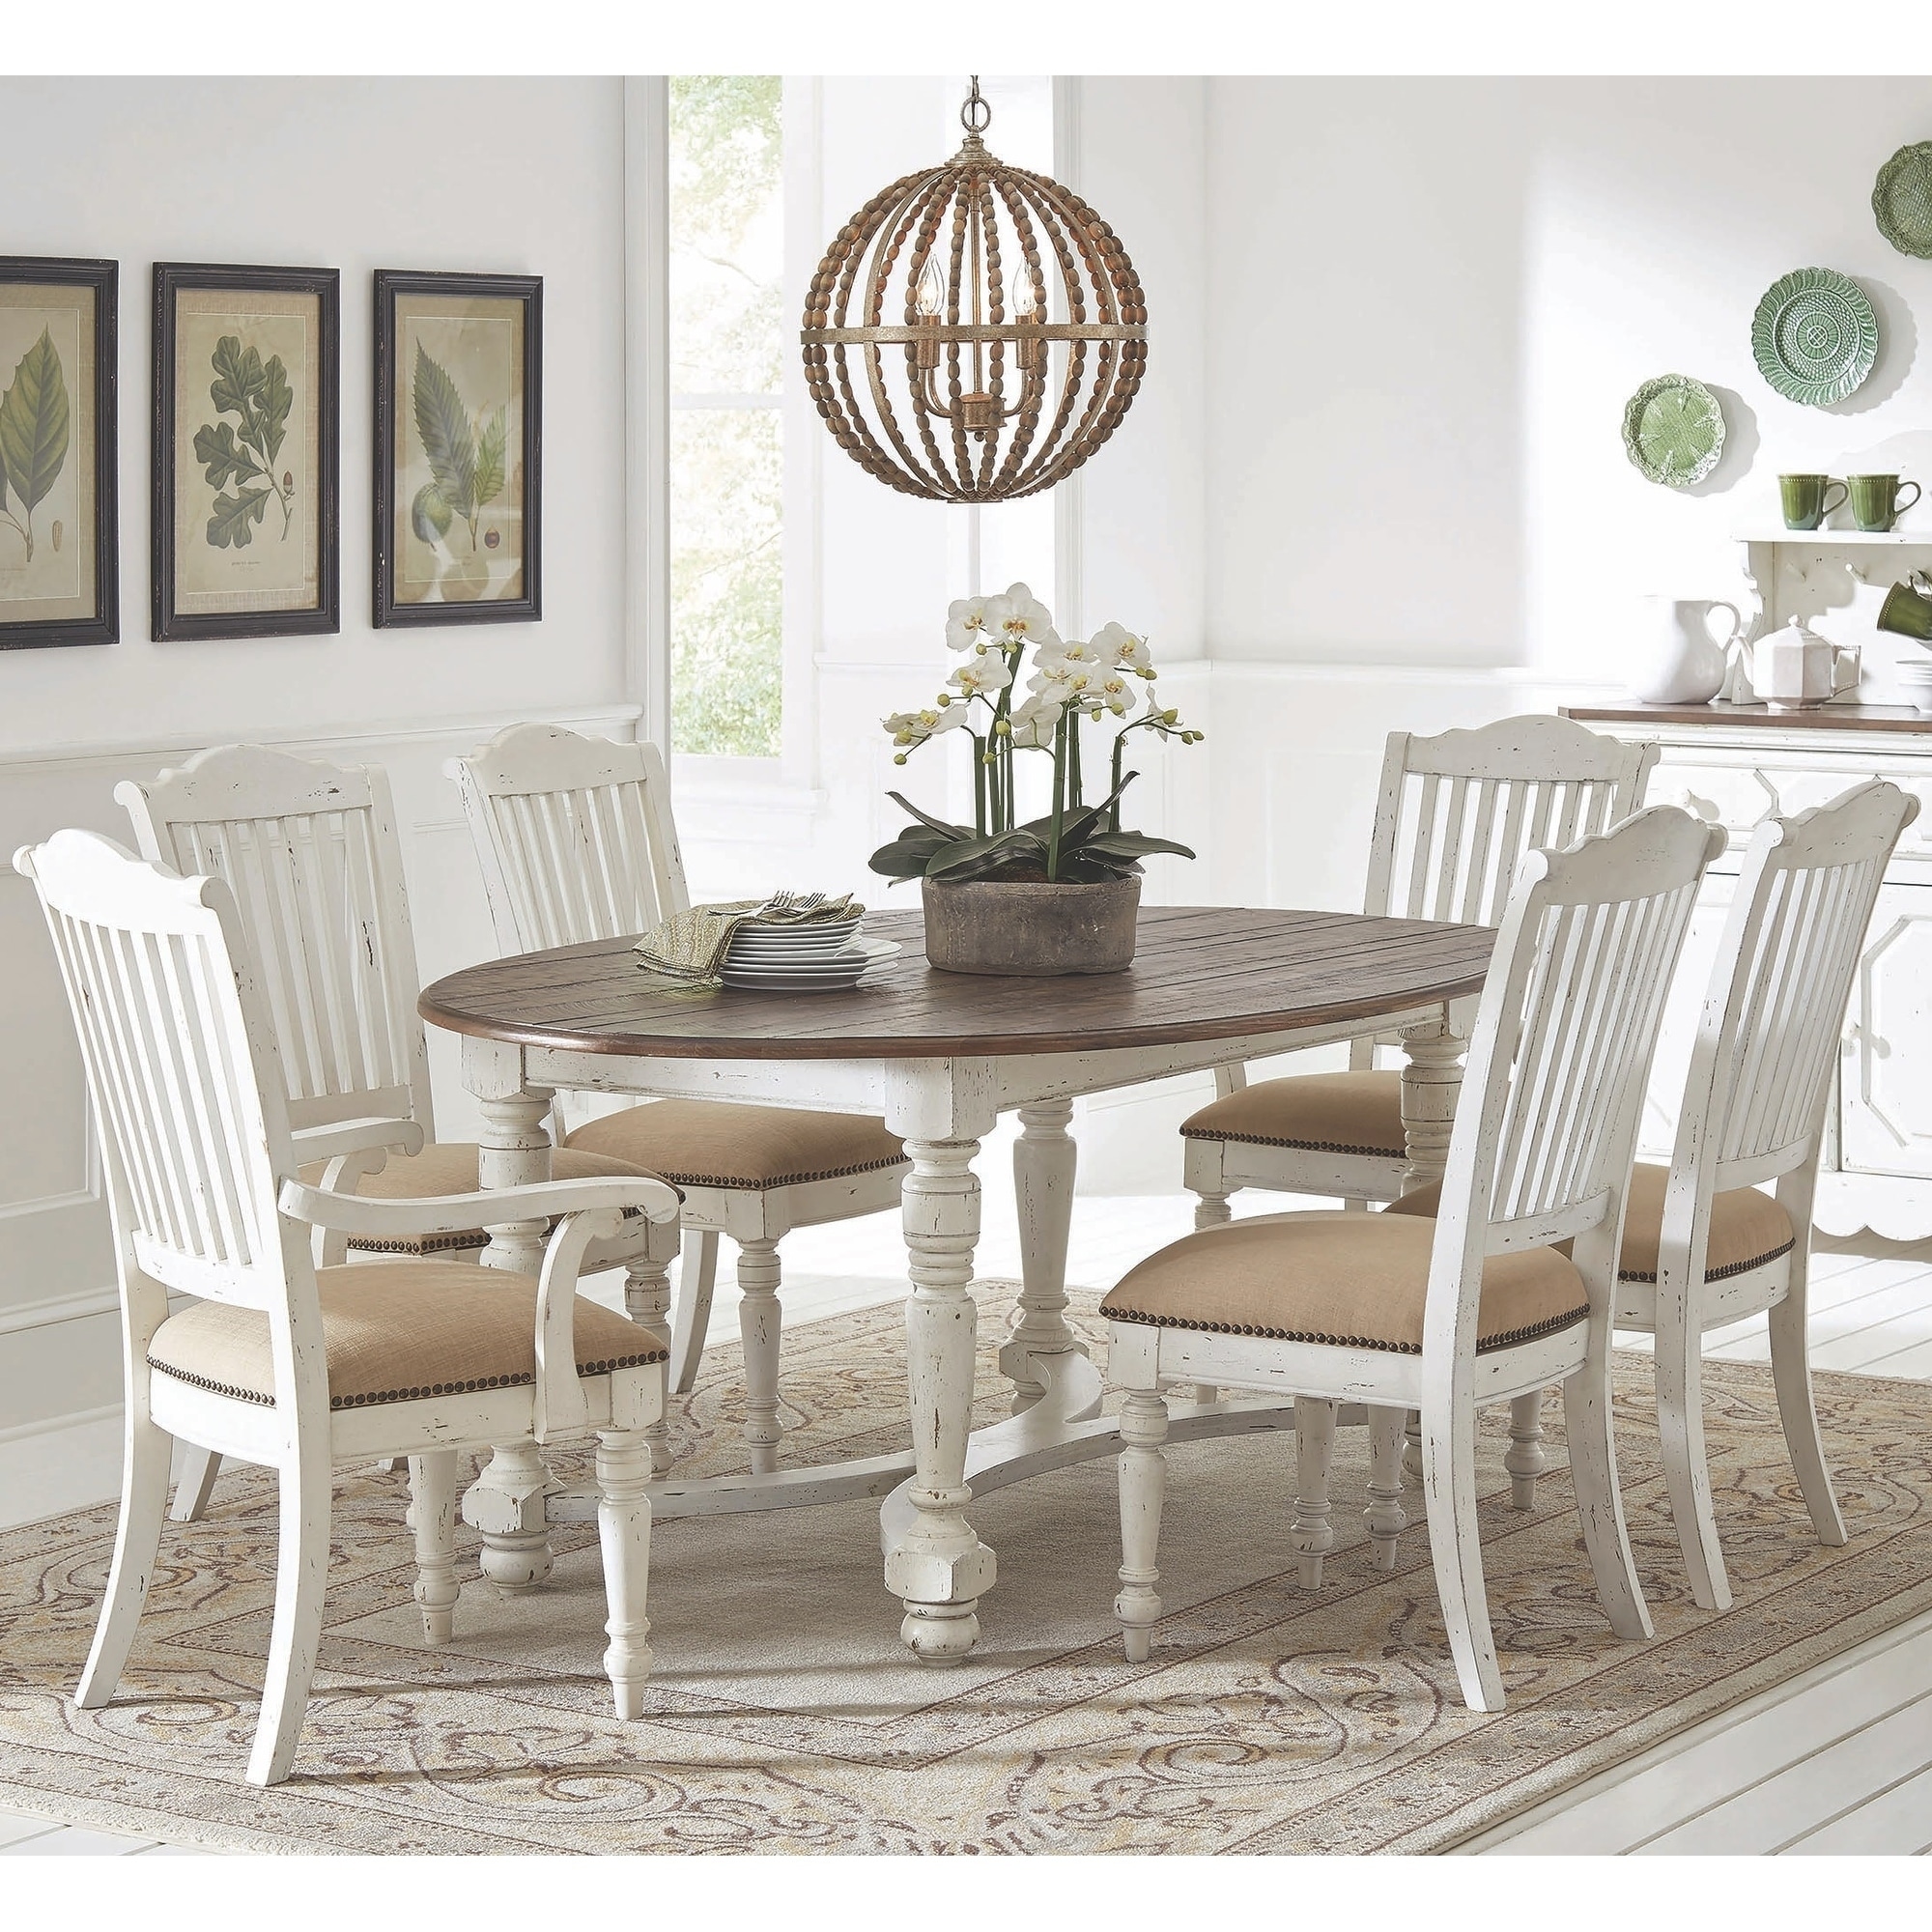 Rustic Farmhouse Design Weathered Two Tone Oval Dining Set On Sale Overstock 28699767